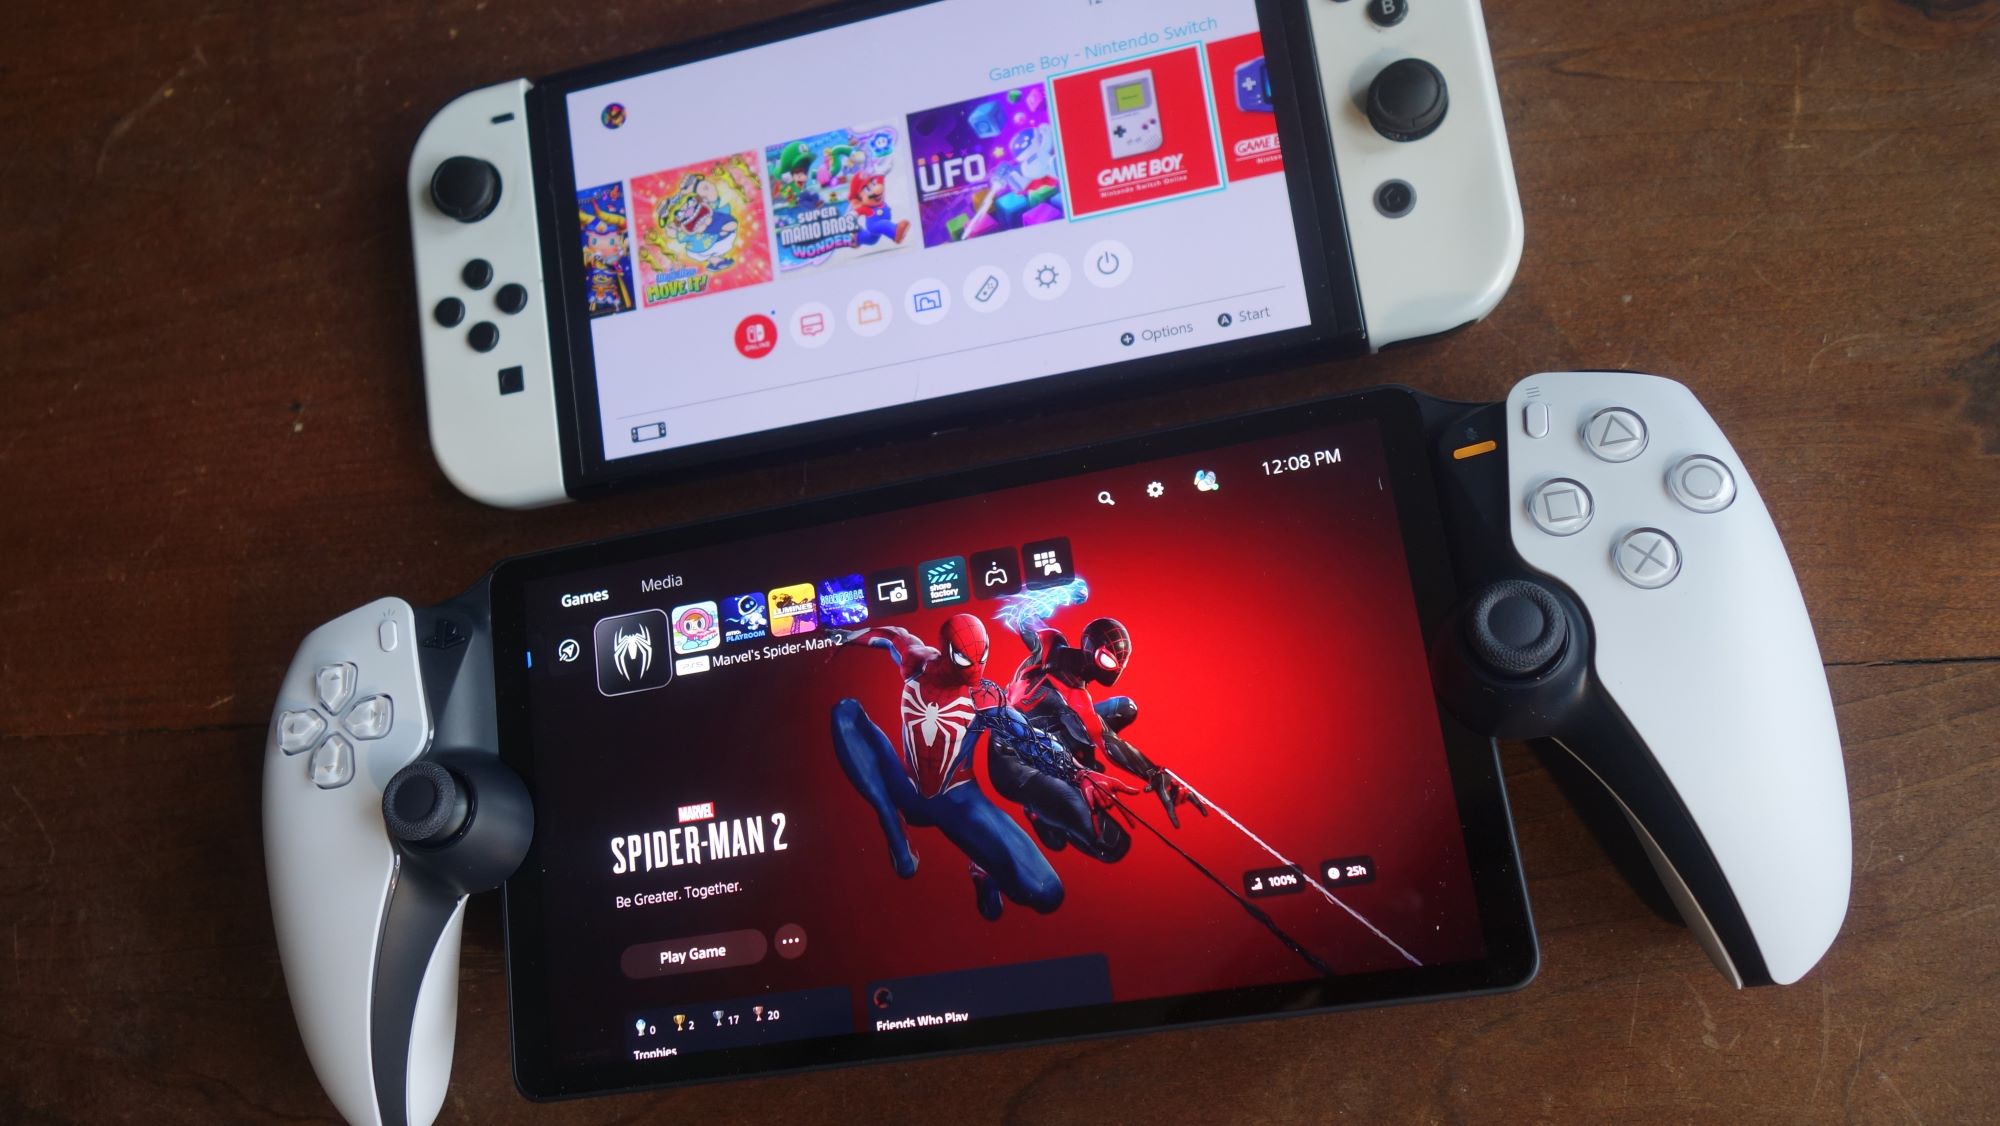 Nintendo Switch vs. PlayStation Portal: which portable device is best?